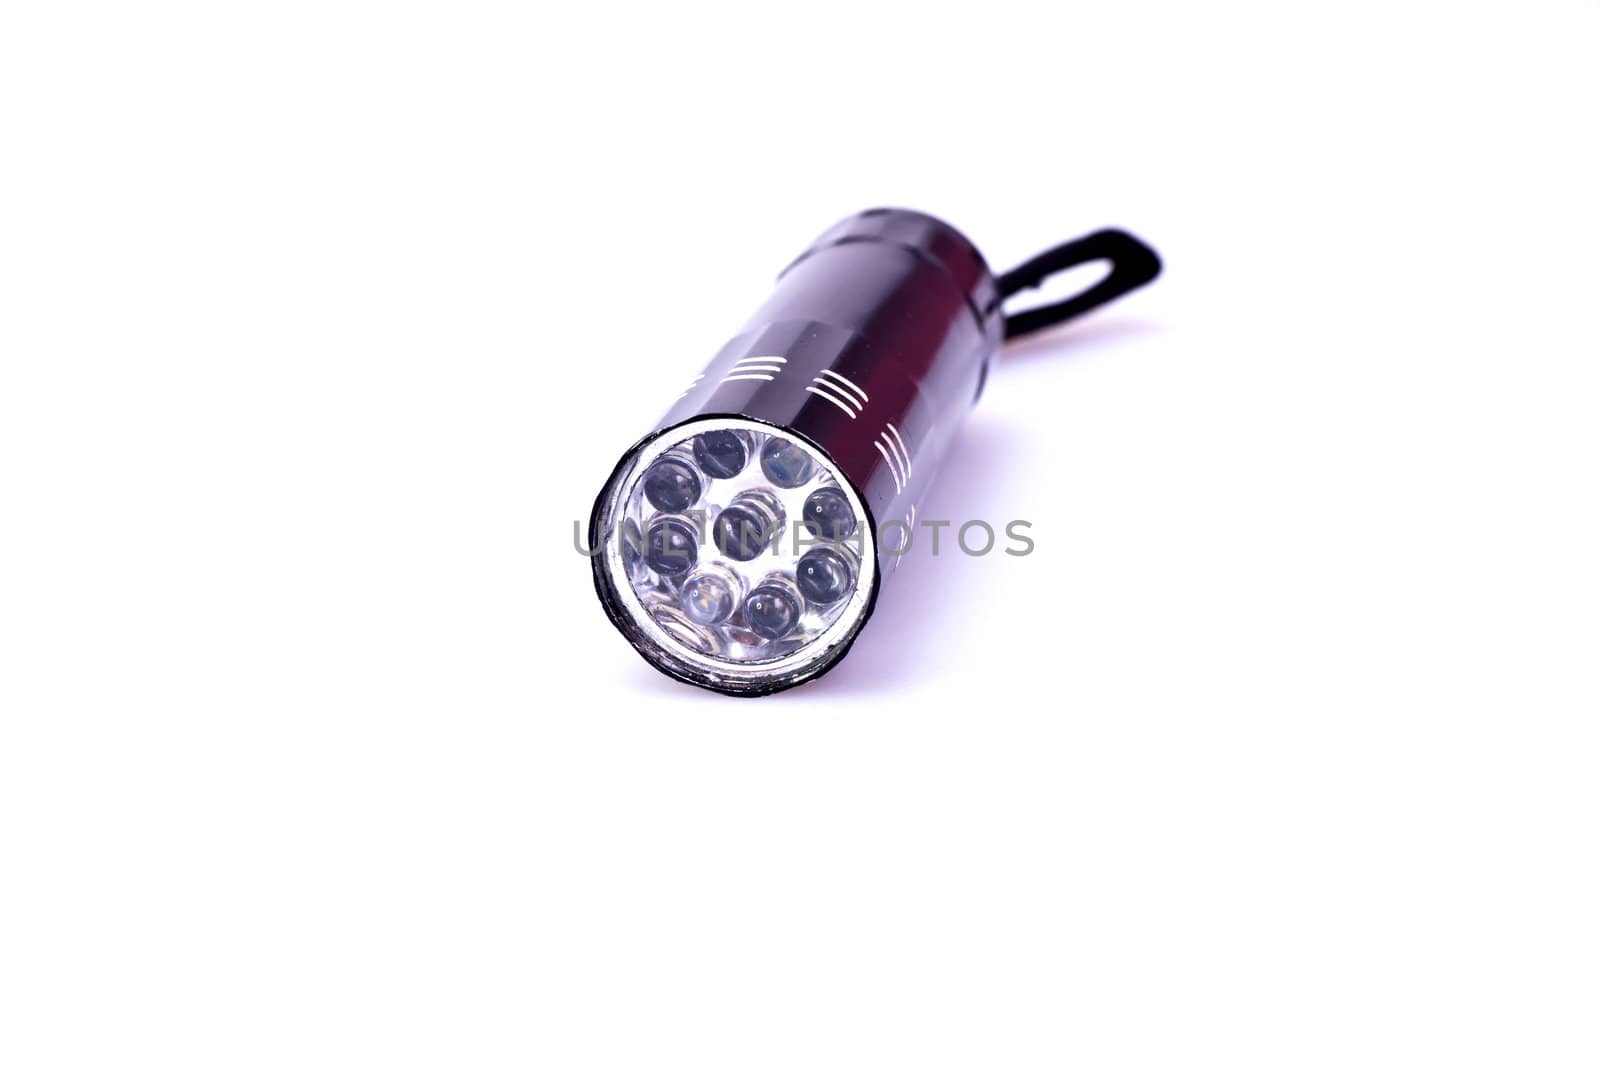 black LED torchlight on white background in close up view